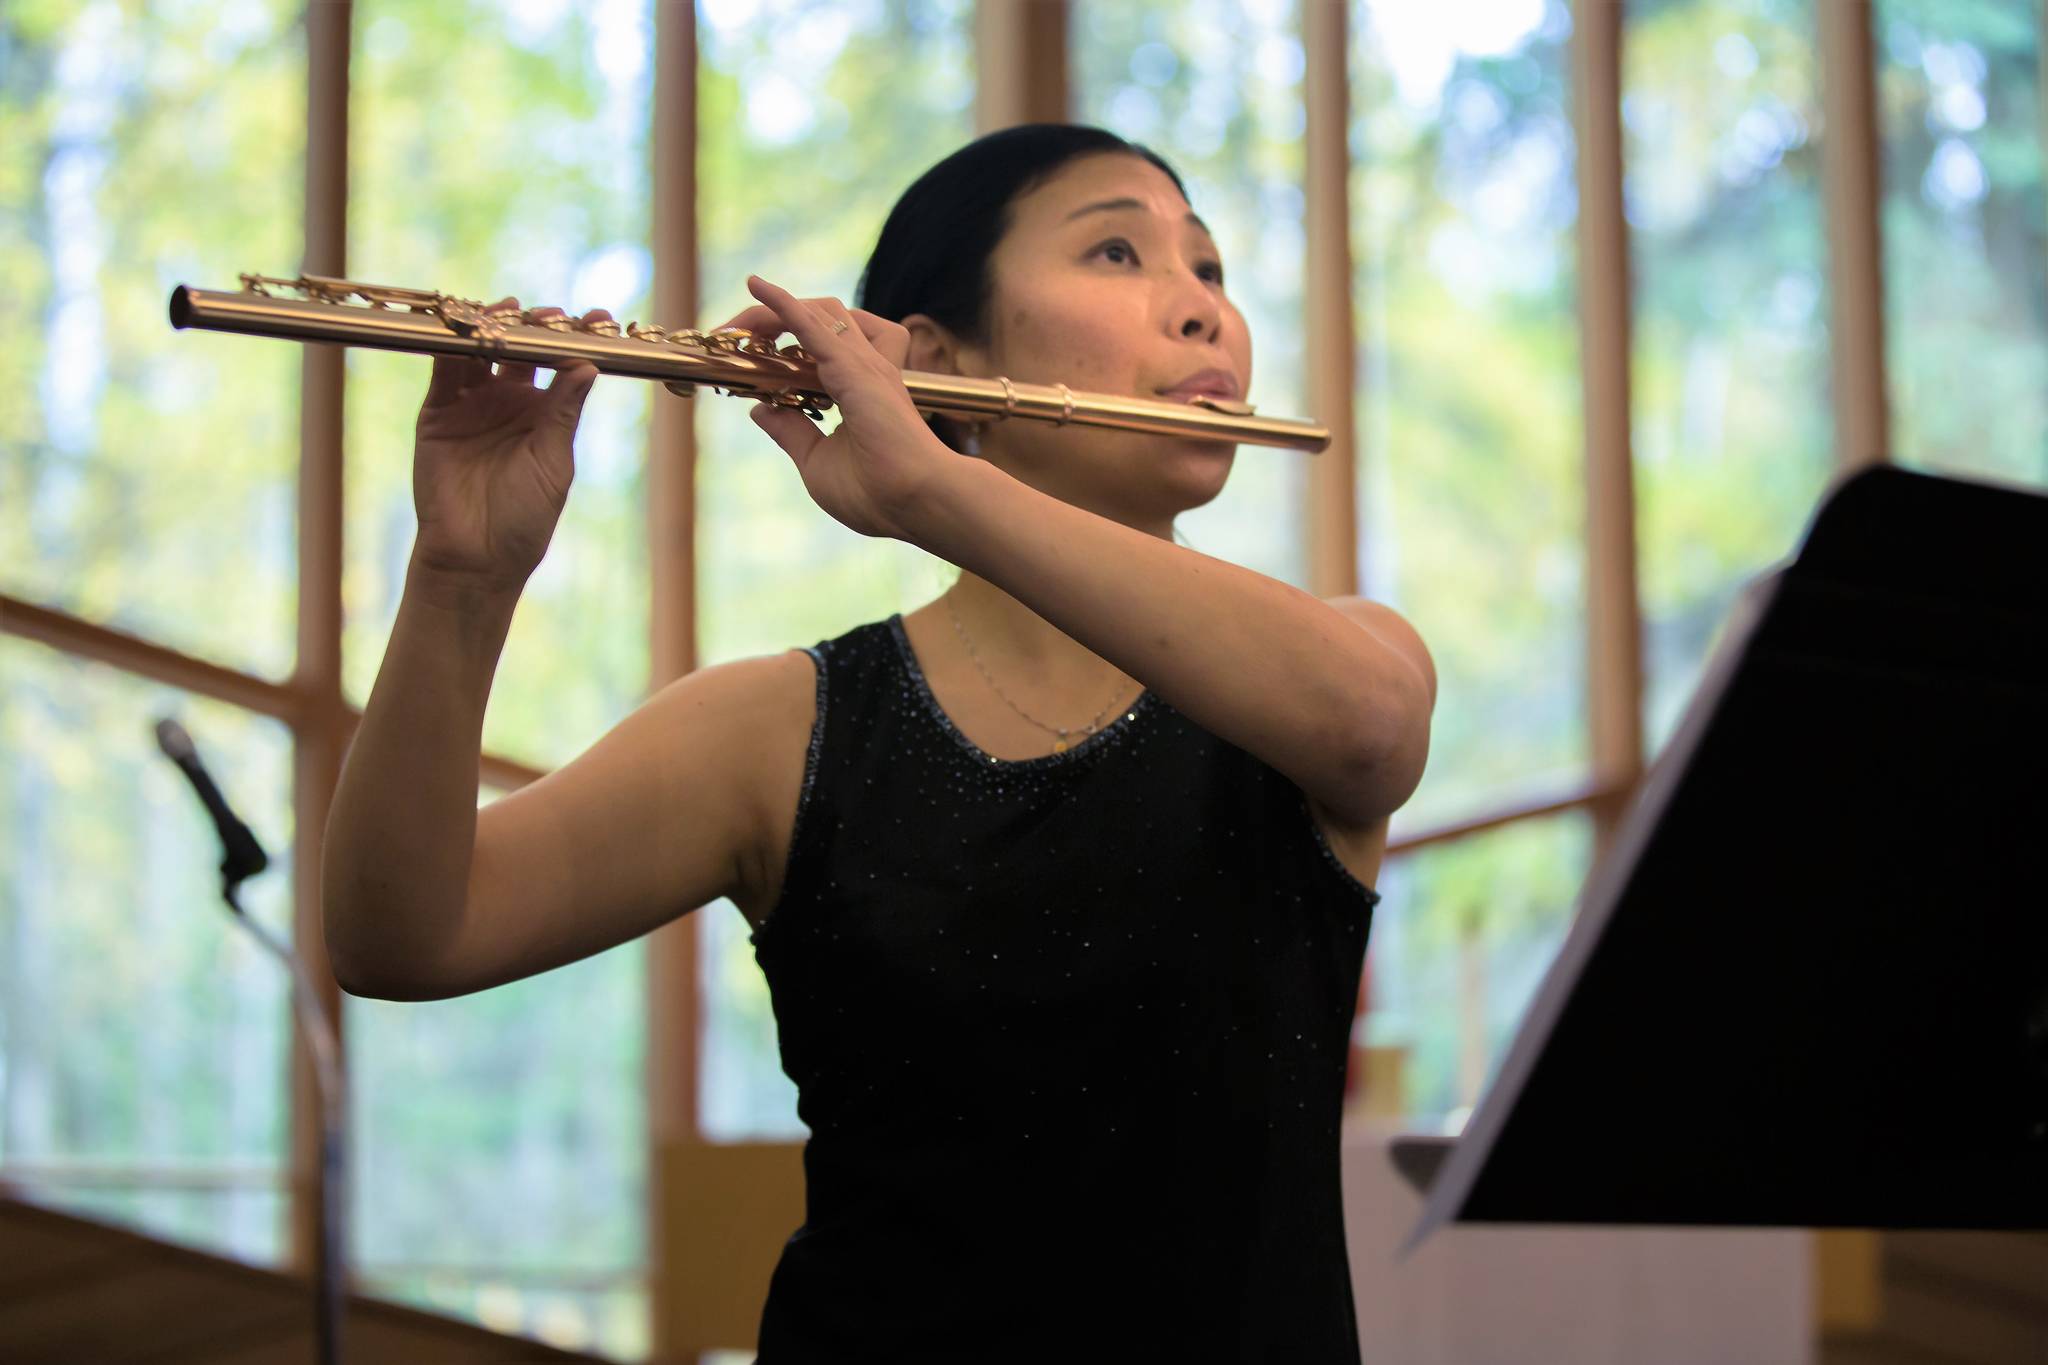 Tomoka Raften, who will be participating in the upcoming Evening of Classics on Oct. 6 with the Kenai Peninsula Orchestra performs the flute at a recent orchestra event. (Photo courtesy of Debbie Boyle)